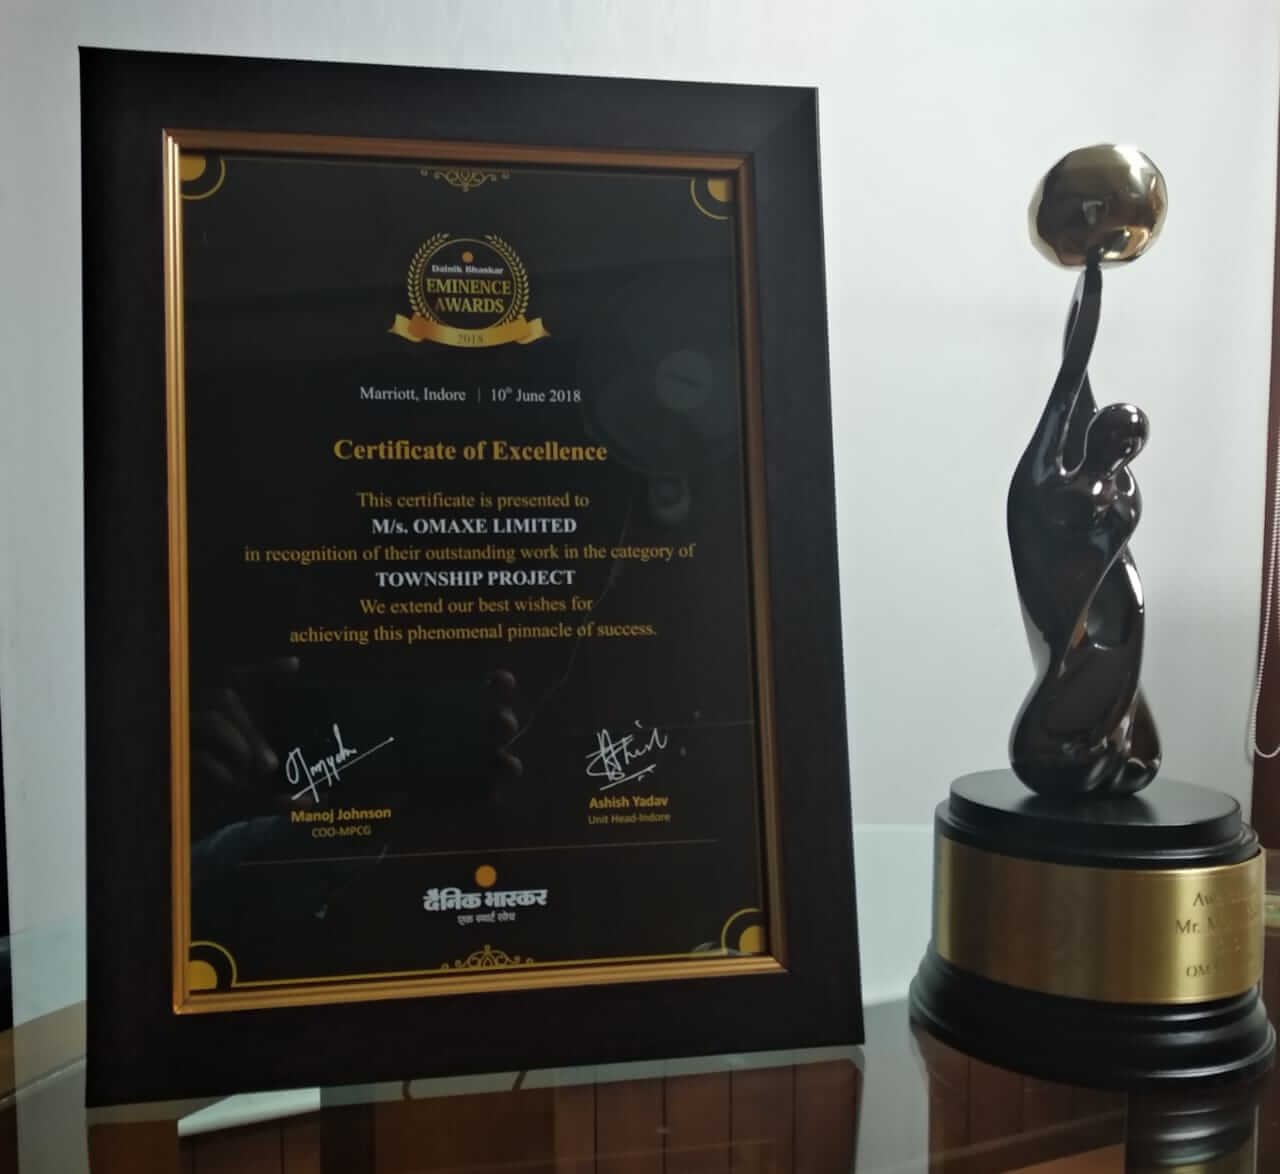 At Eminence Awards 2018 held on June 10, 2018 in Indore, Omaxe Ltd. was recognized for building Best Township 'Omaxe City-1'